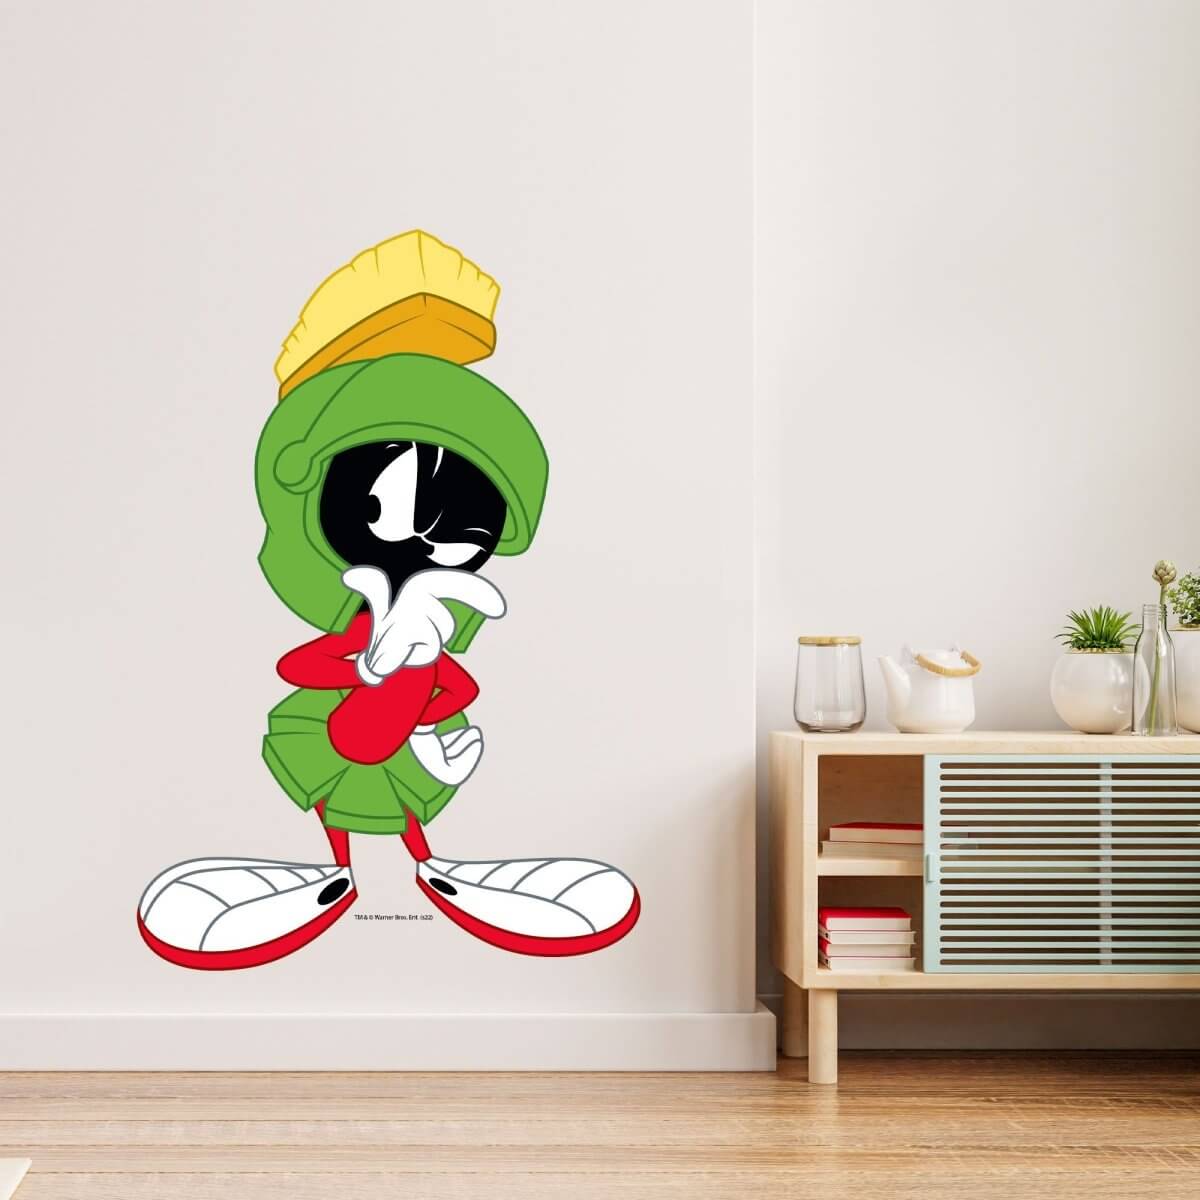 Kismet Decals Looney Tunes Marvin in Thought Licensed Wall Sticker - Easy DIY Home & Kids Room Decor Wall Decal Art - Kismet Decals